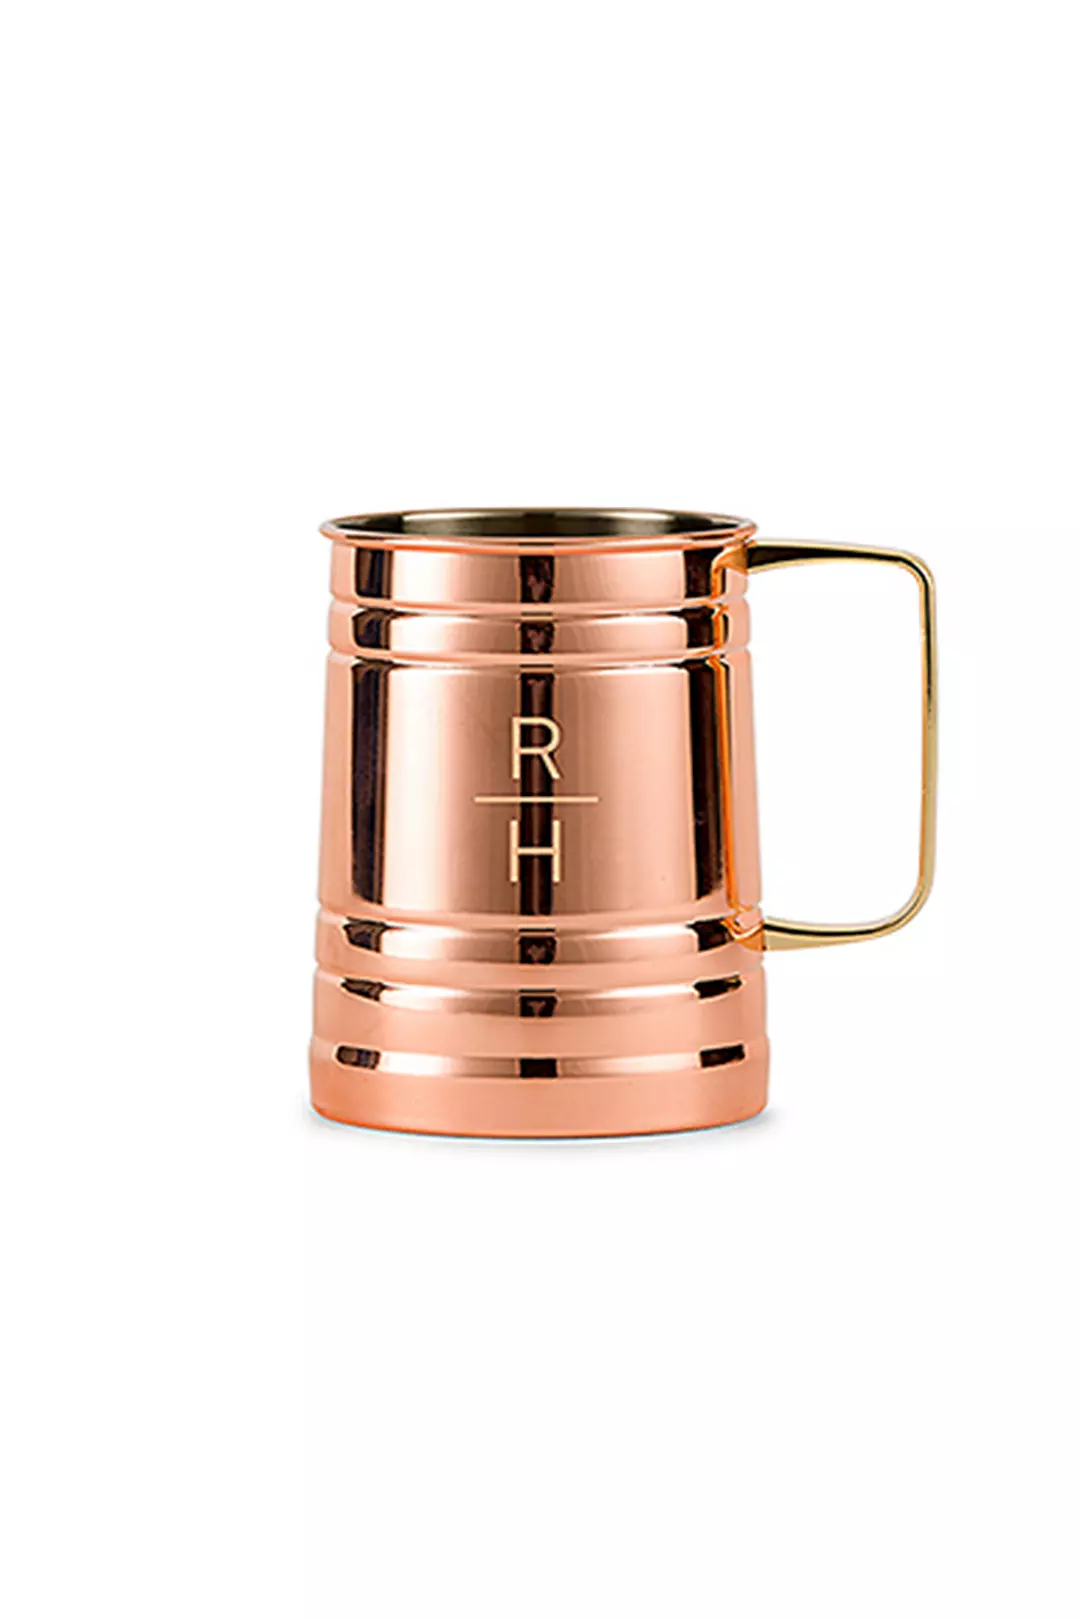 Personalized Stacked Monogram Moscow Mule Stein Image